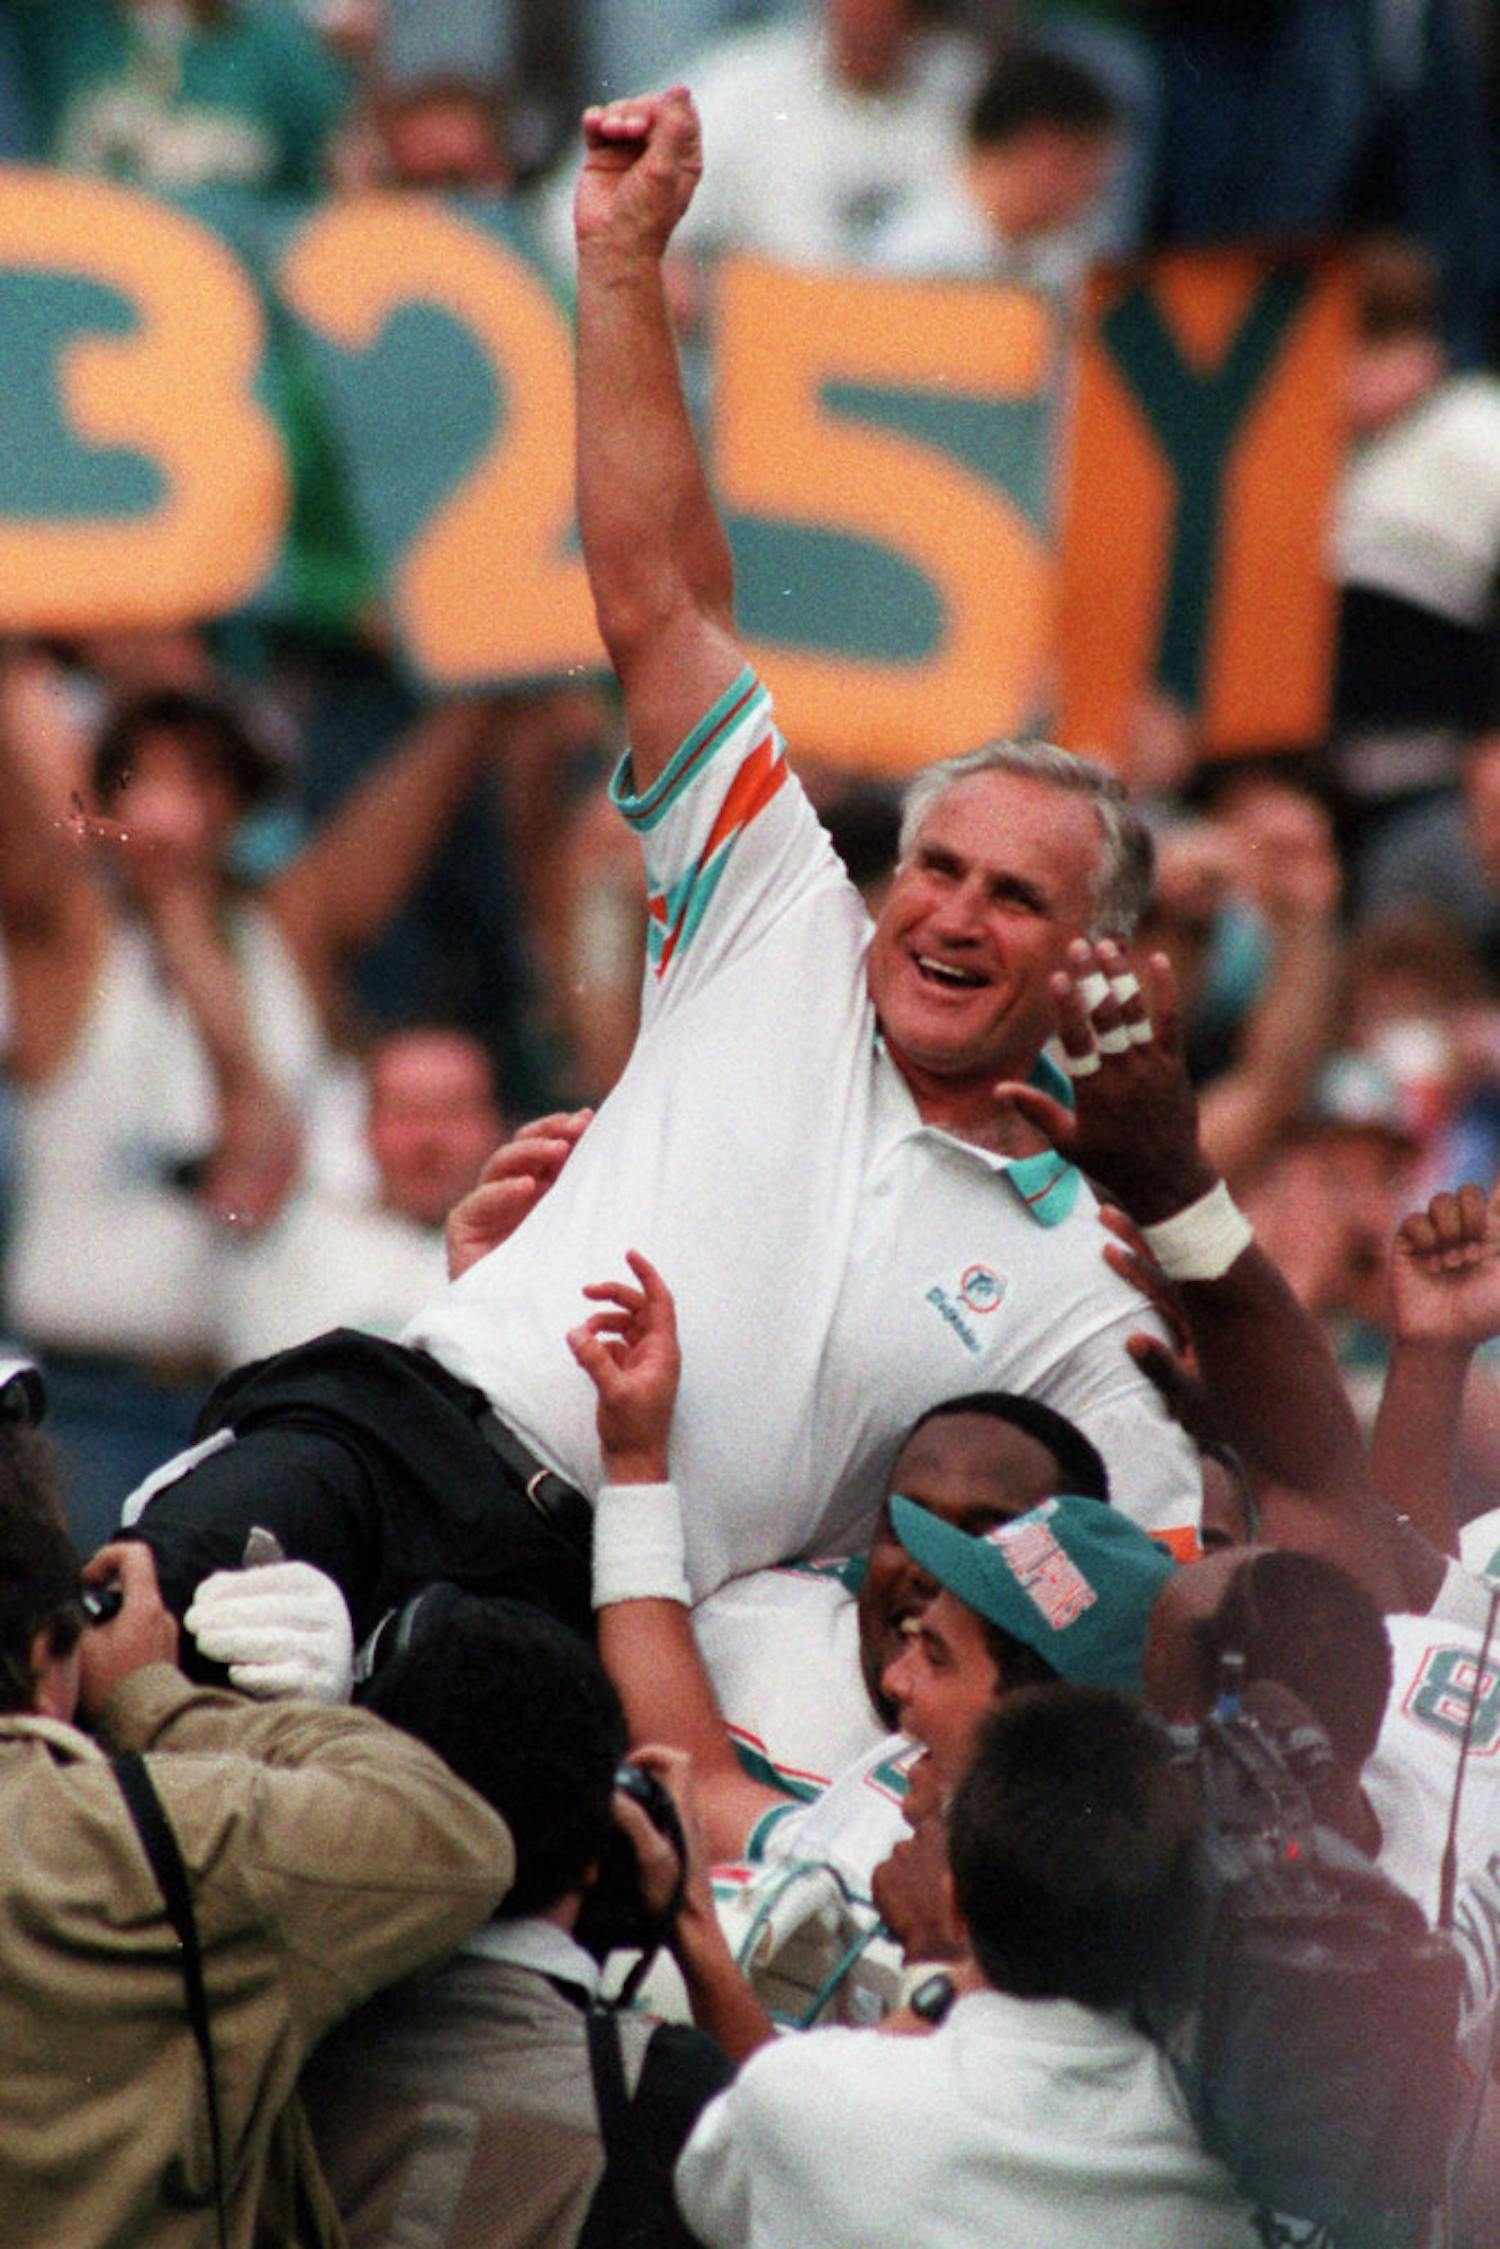 FILE - In this Nov. 14, 1993, file photo, Miami Dolphins coach Don Shula is carried on his team's shoulders after his 325th victory, at Philadelphia's Veterans Stadium. Shula, who won the most games of any NFL coach and led the Miami Dolphins to the only perfect season in league history, died Monday, May 4, 2020, at his home in Indian Creek, Fla., the team said. He was 90. (AP Photo/Amy Sancetta, File)